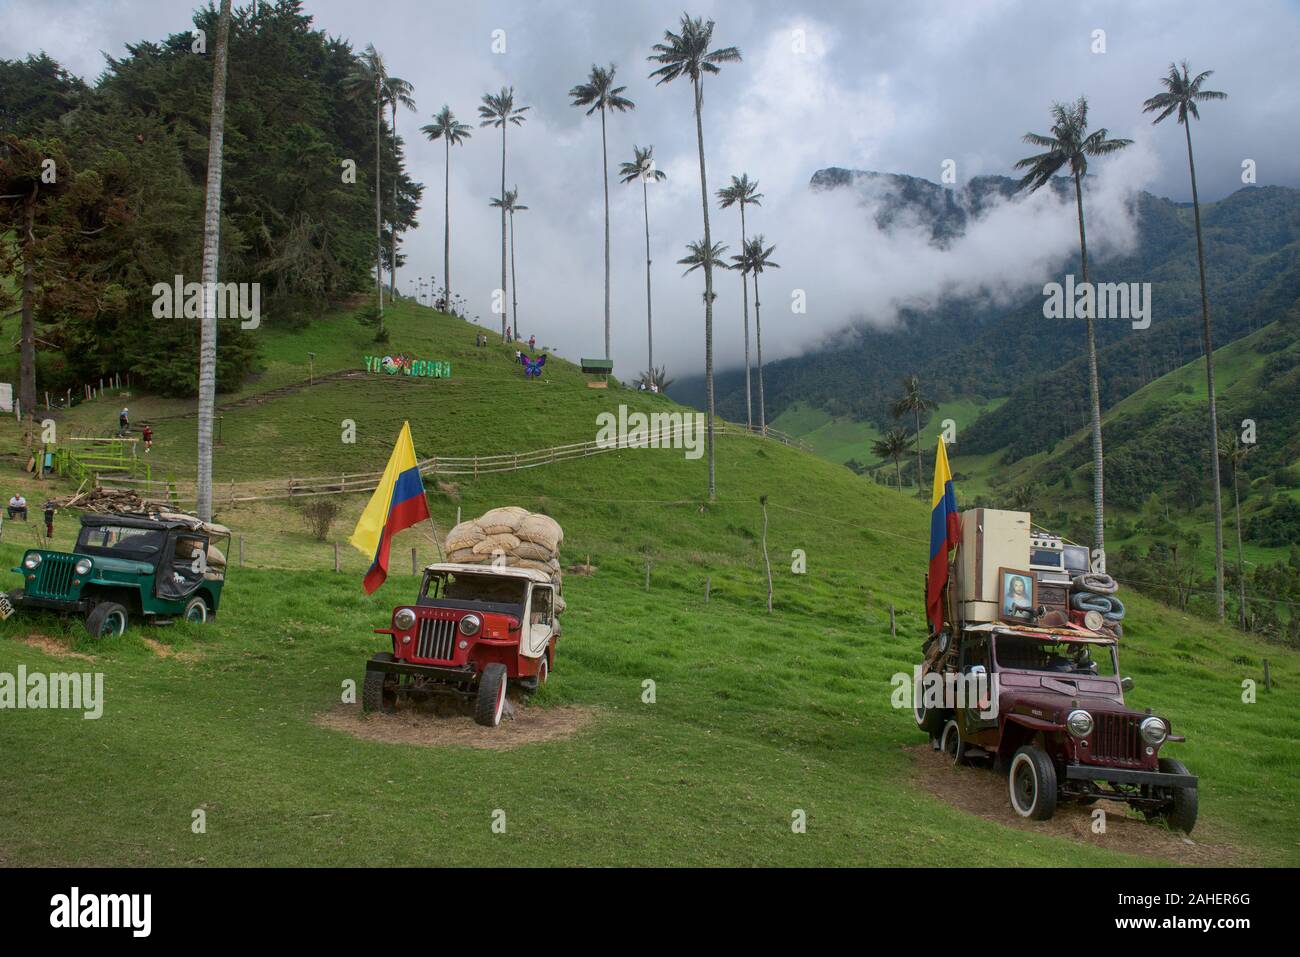 Vintage Willy jeeps under wax palms, Cocora Valley, Salento, Colombia Stock Photo